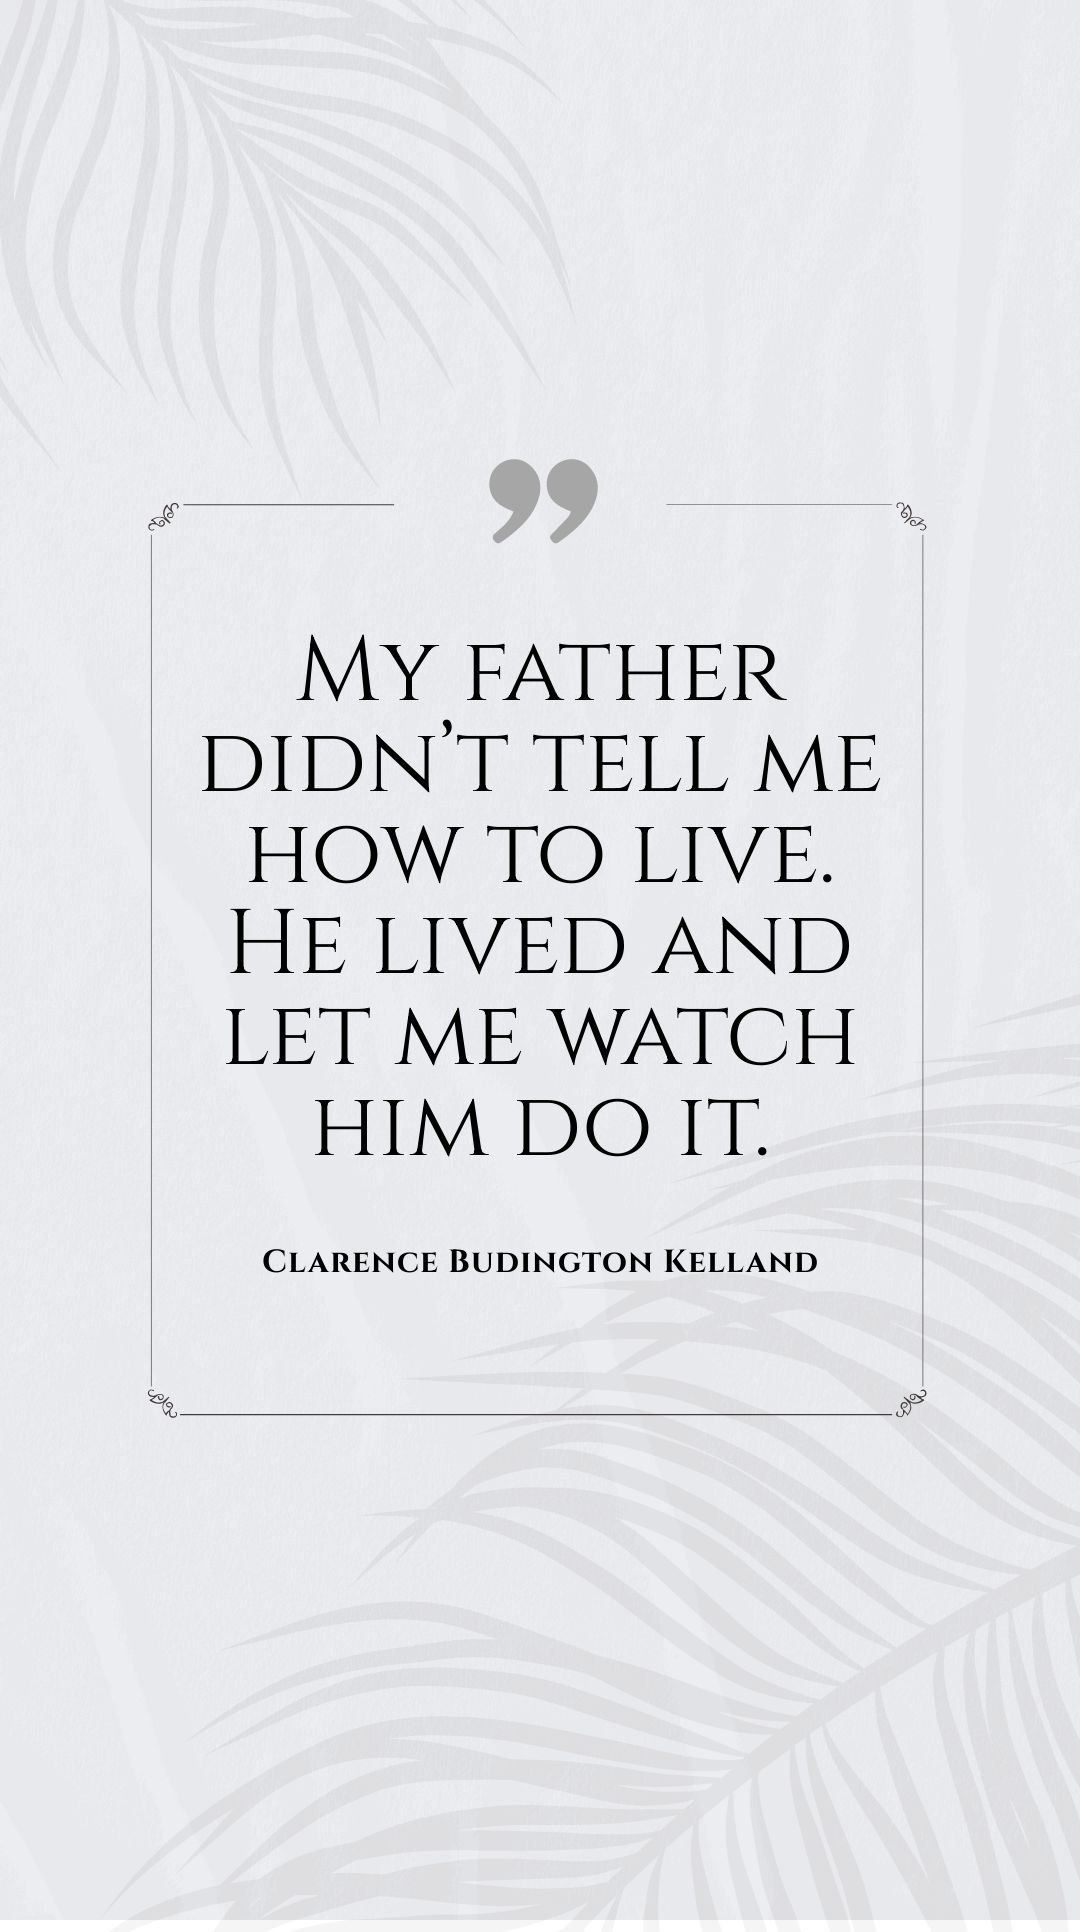 Clarence Budington Kelland - “My father didn’t tell me how to live. He lived and let me watch him do it.”